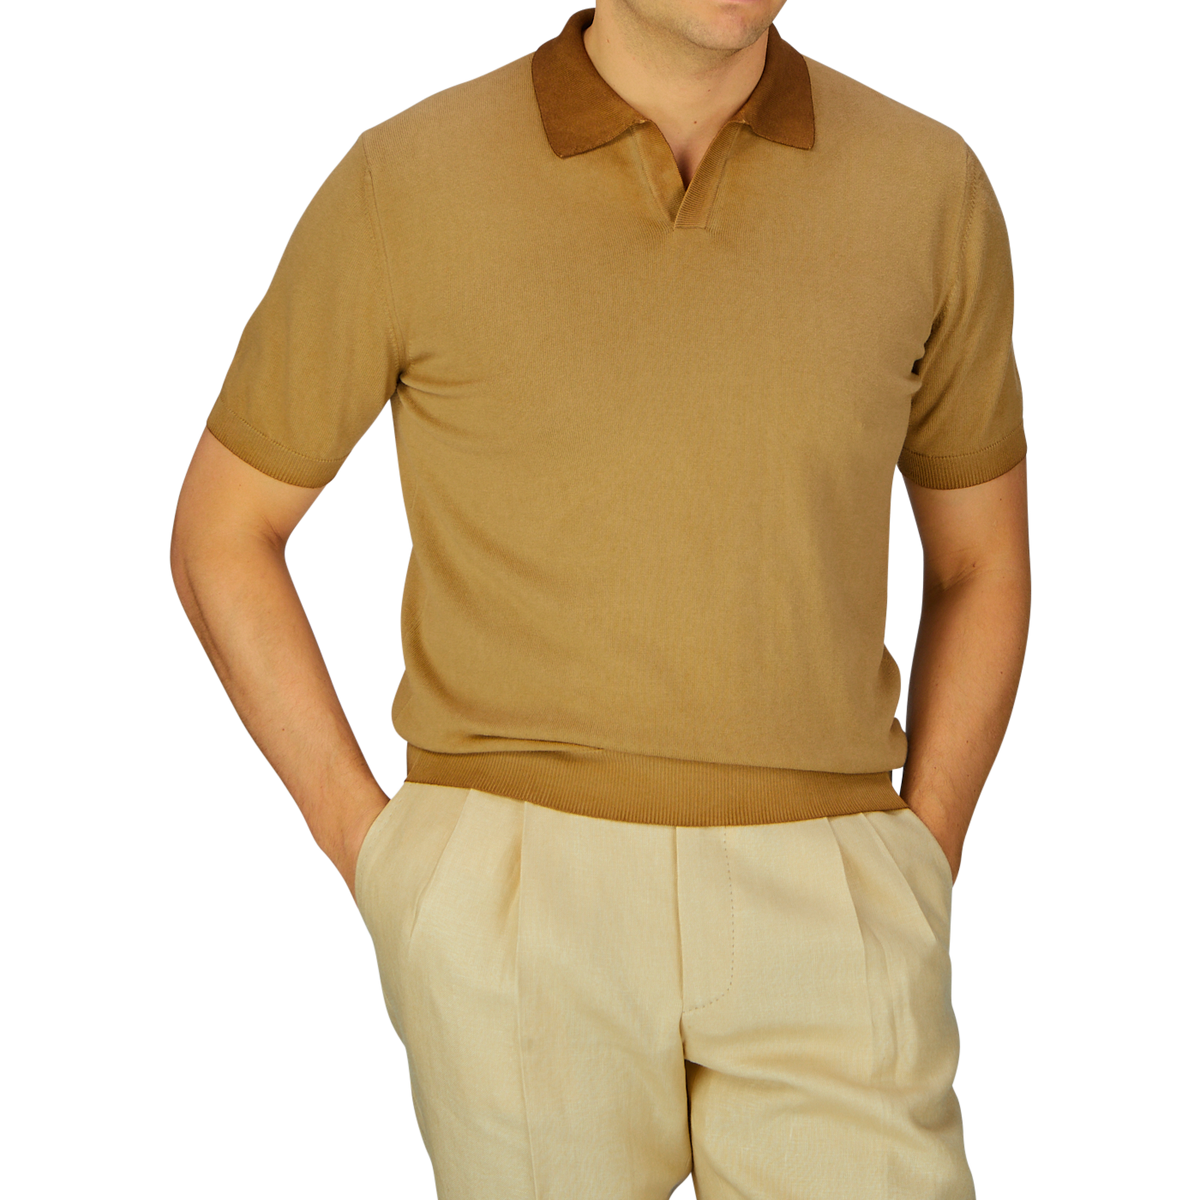 Man wearing an Altea seasonal tan polo shirt with a brown collar and garment-dyed light-colored trousers.